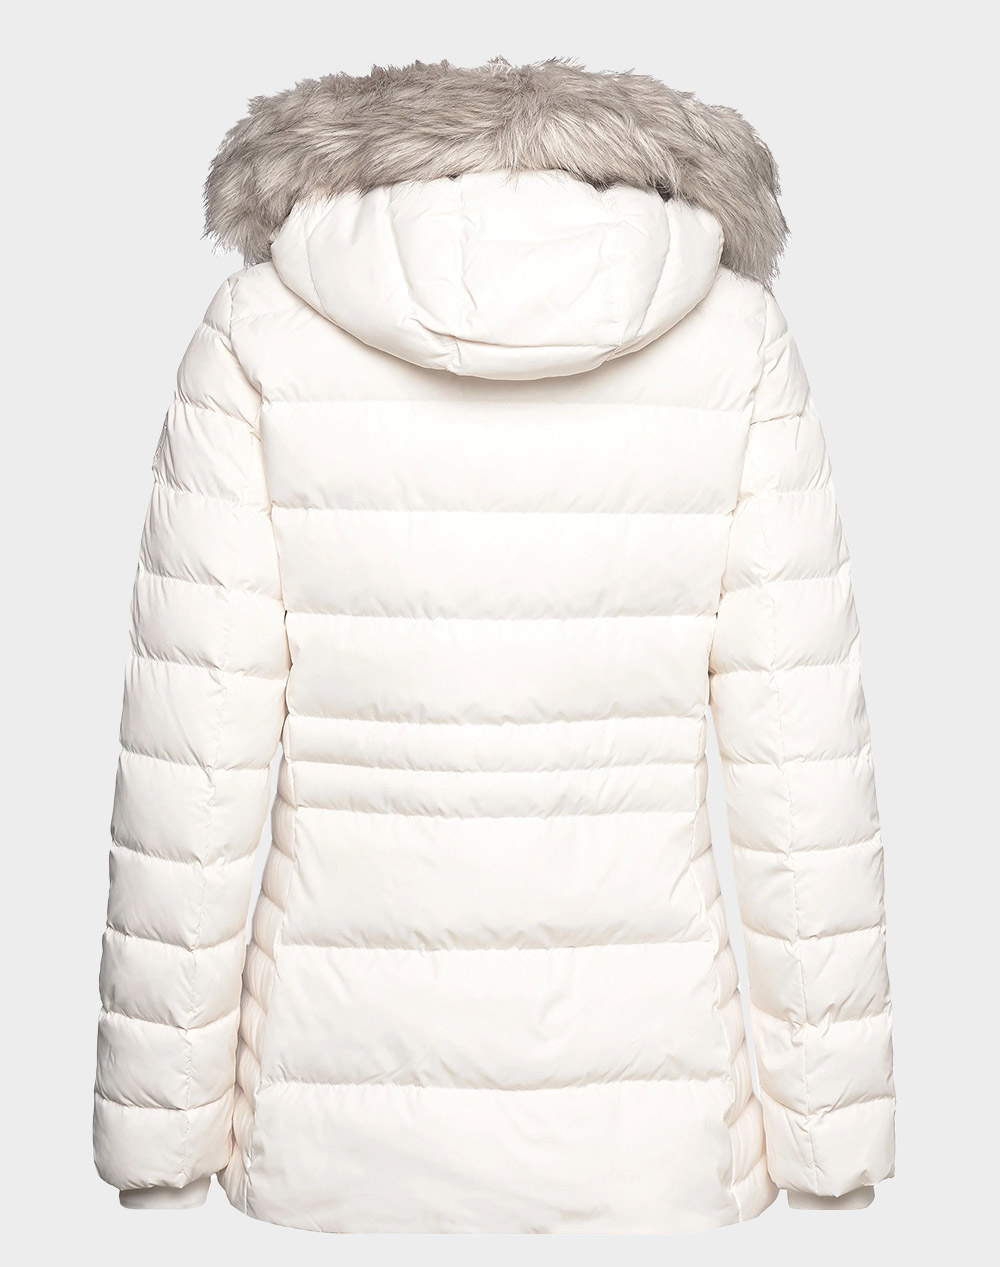 TOMMY HILFIGER TYRA DOWN JACKET WITH FUR